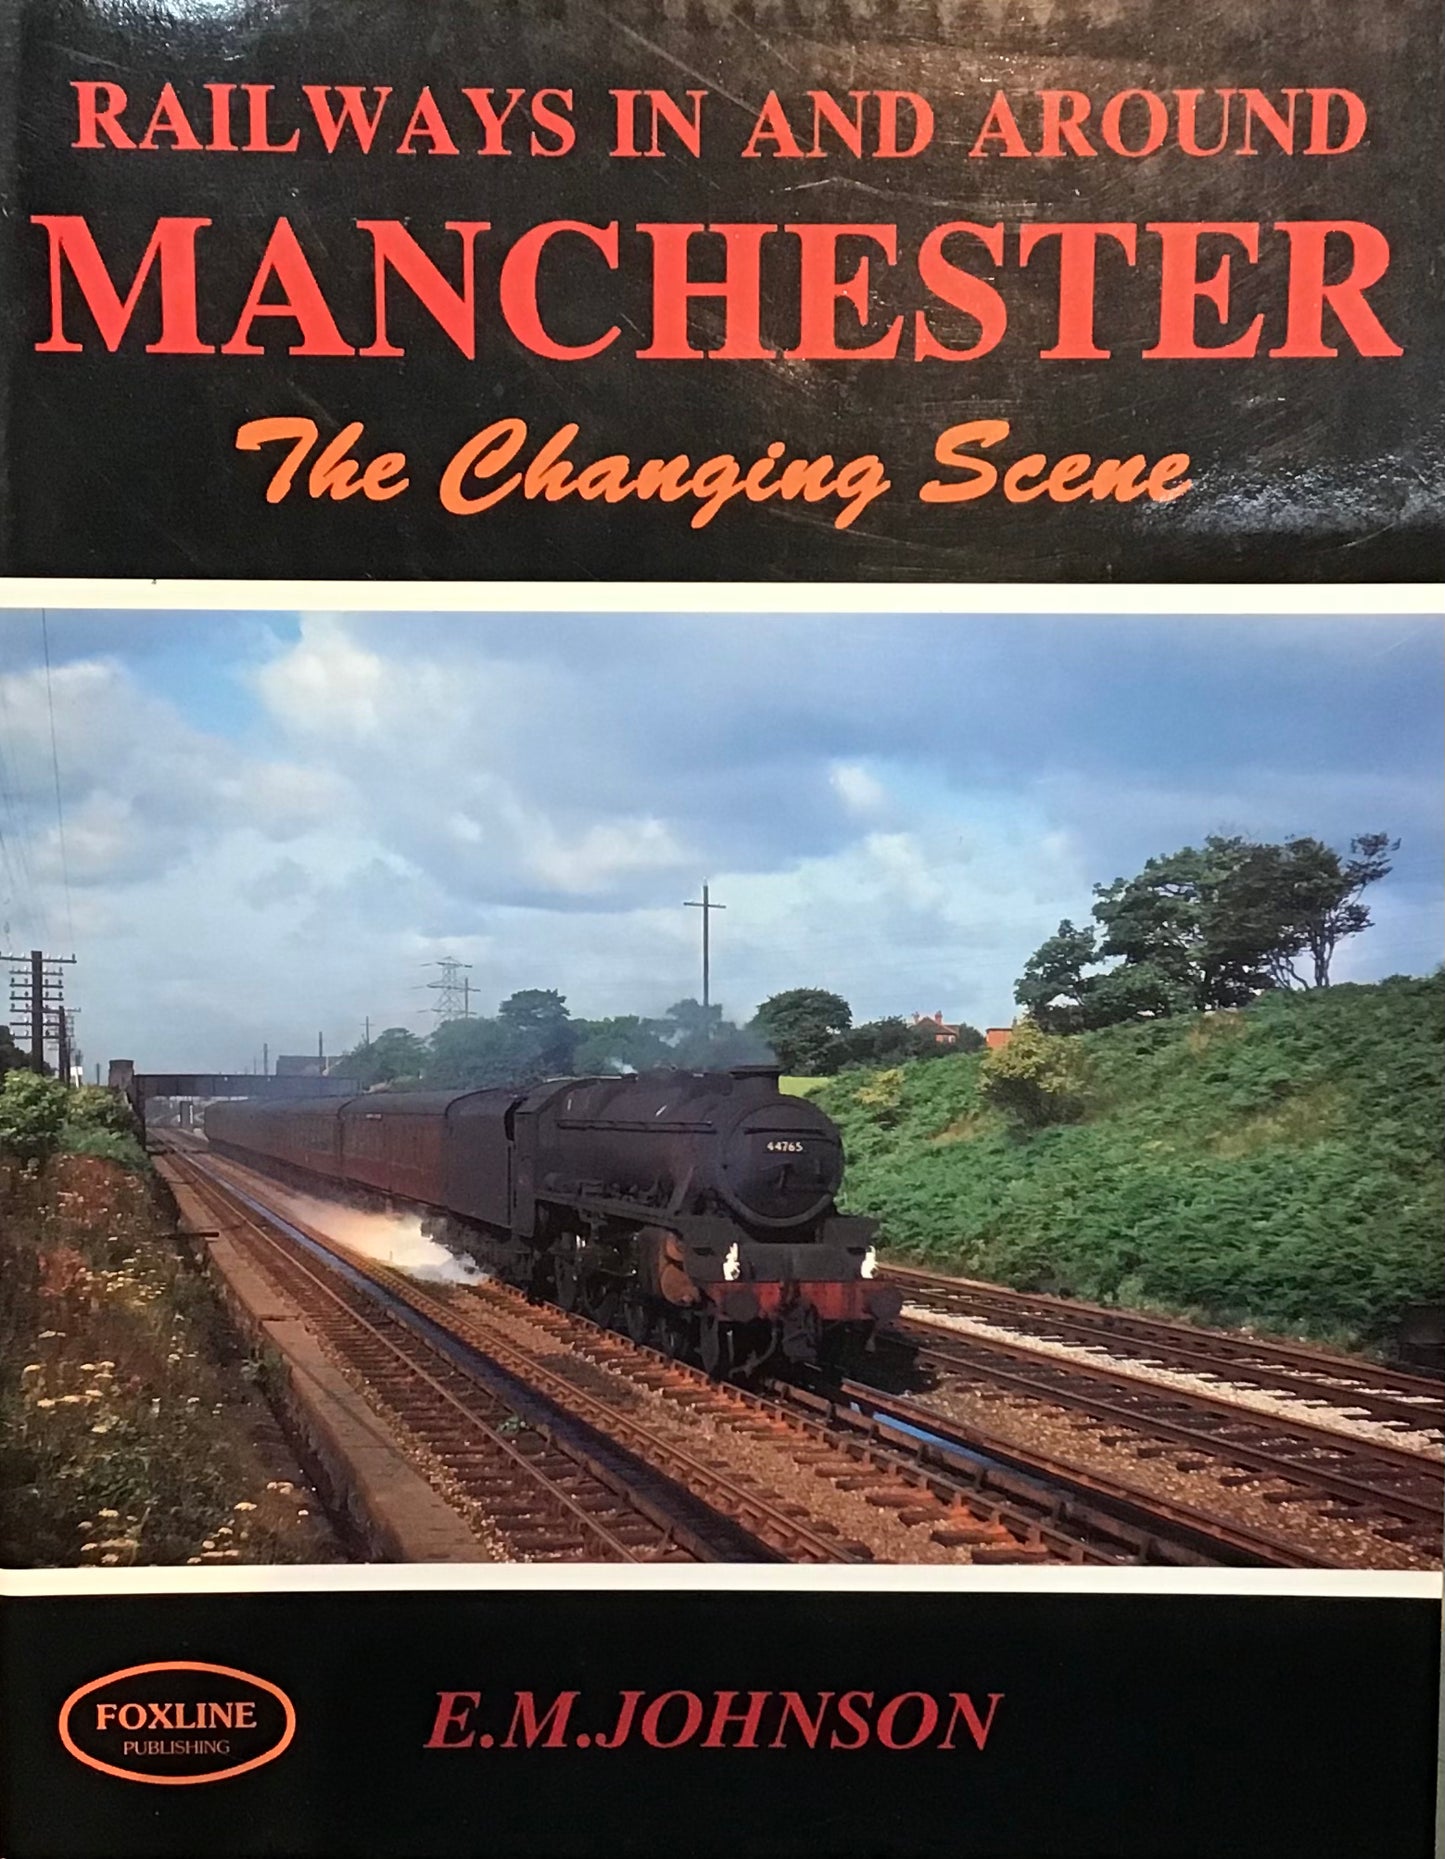 Railways In and Around Manchester: The Changing Scene by E.M. Johnson - Chester Model Centre